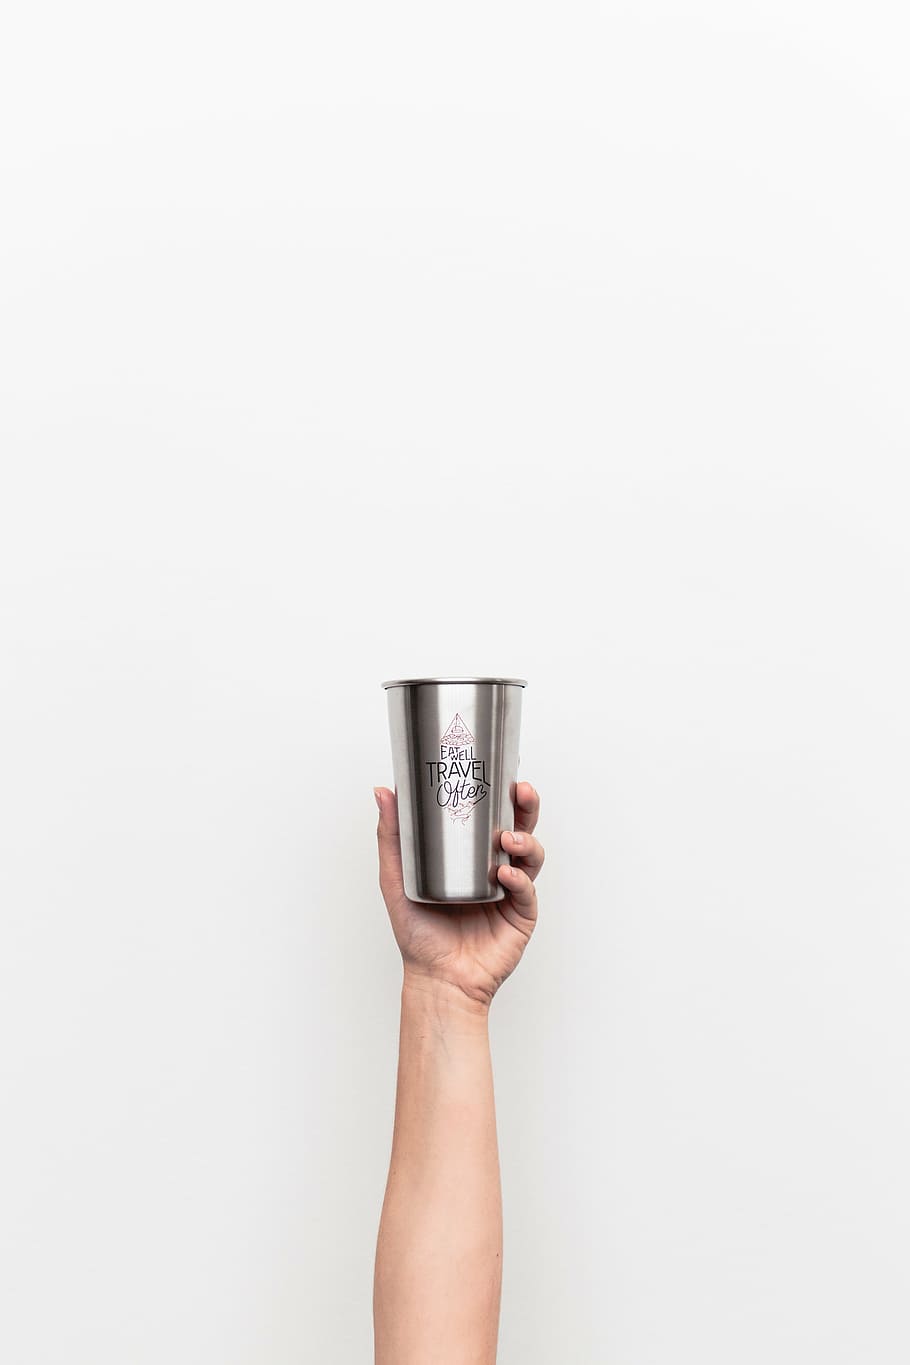 person holding gray Travel stainless steel drinking cup, white